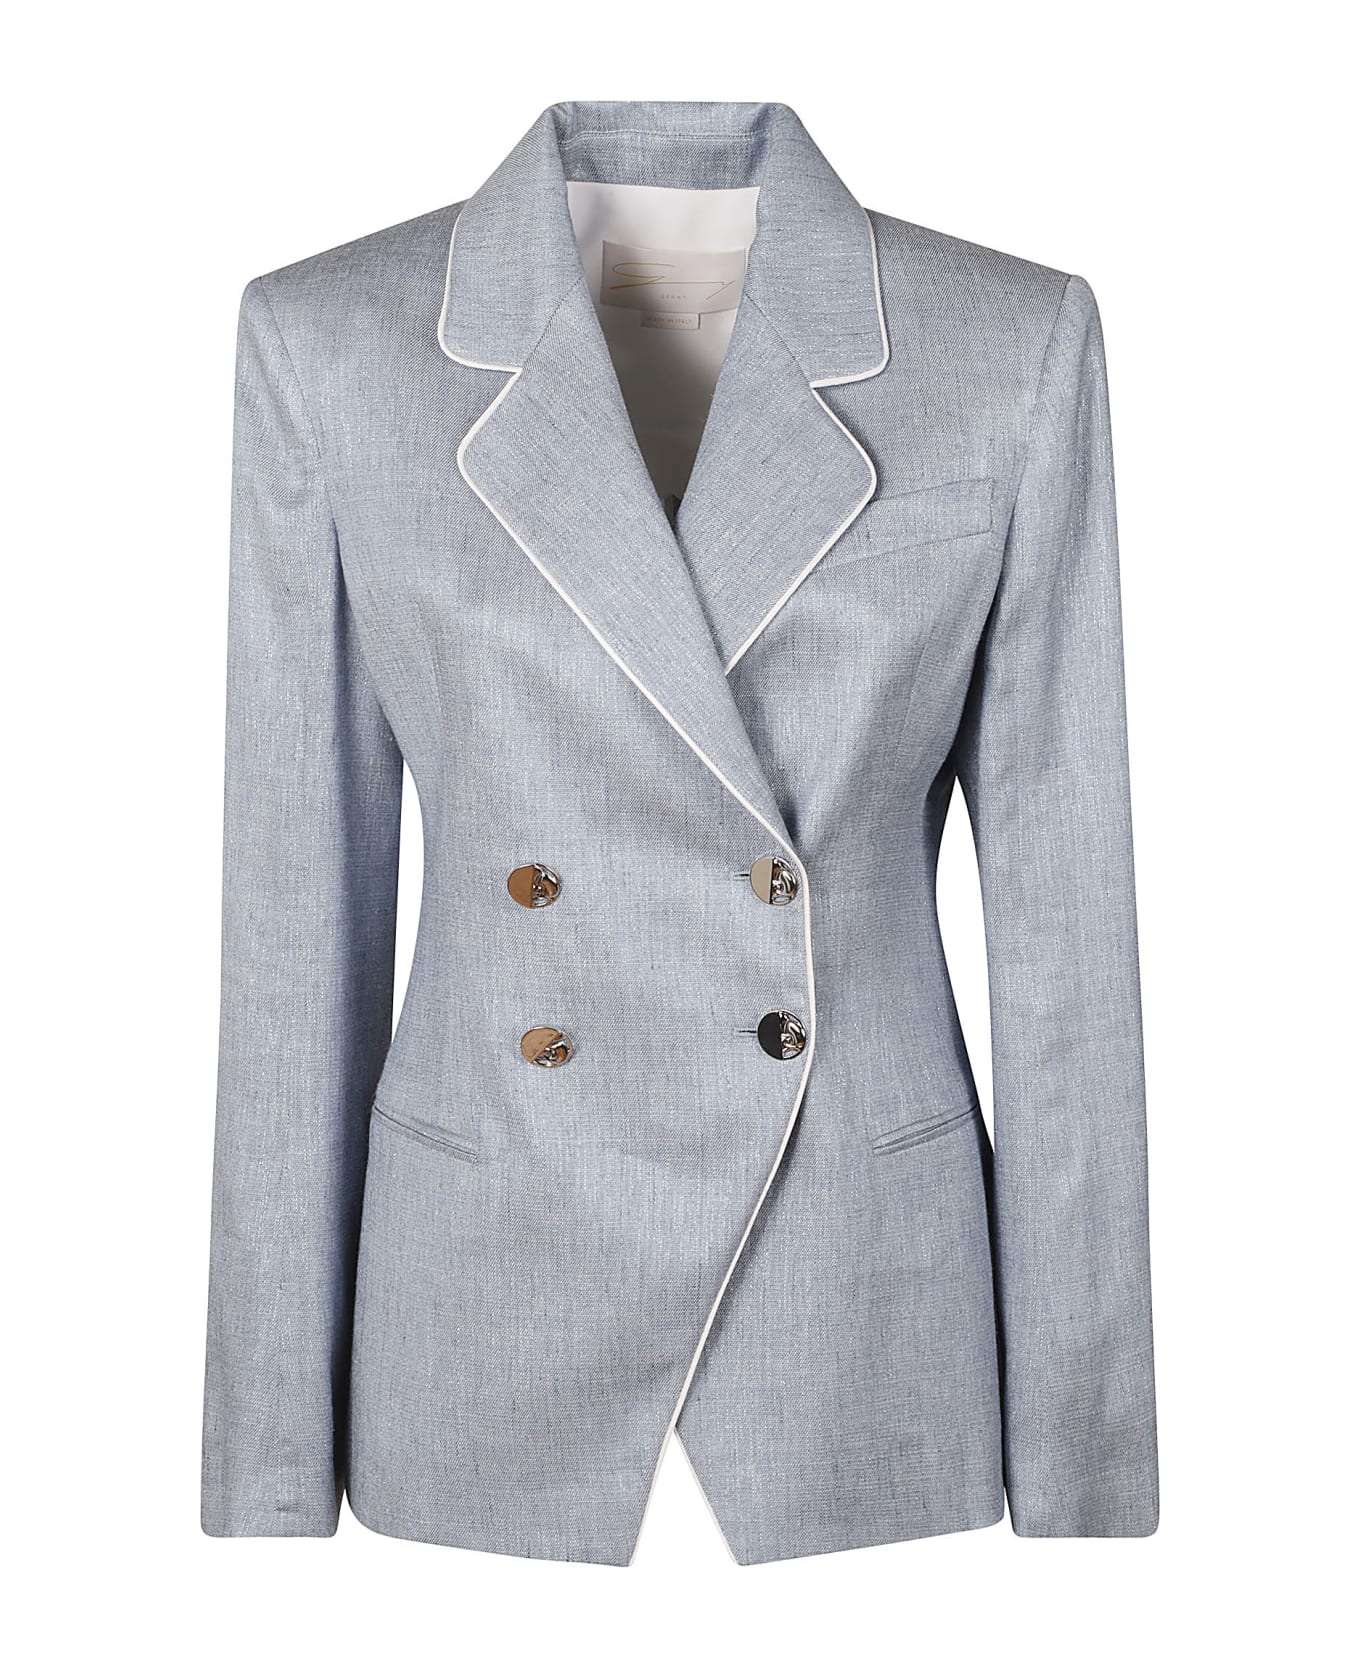 Genny Jacquard Double-breasted Dinner Jacket - LIGHT BLUE ブレザー